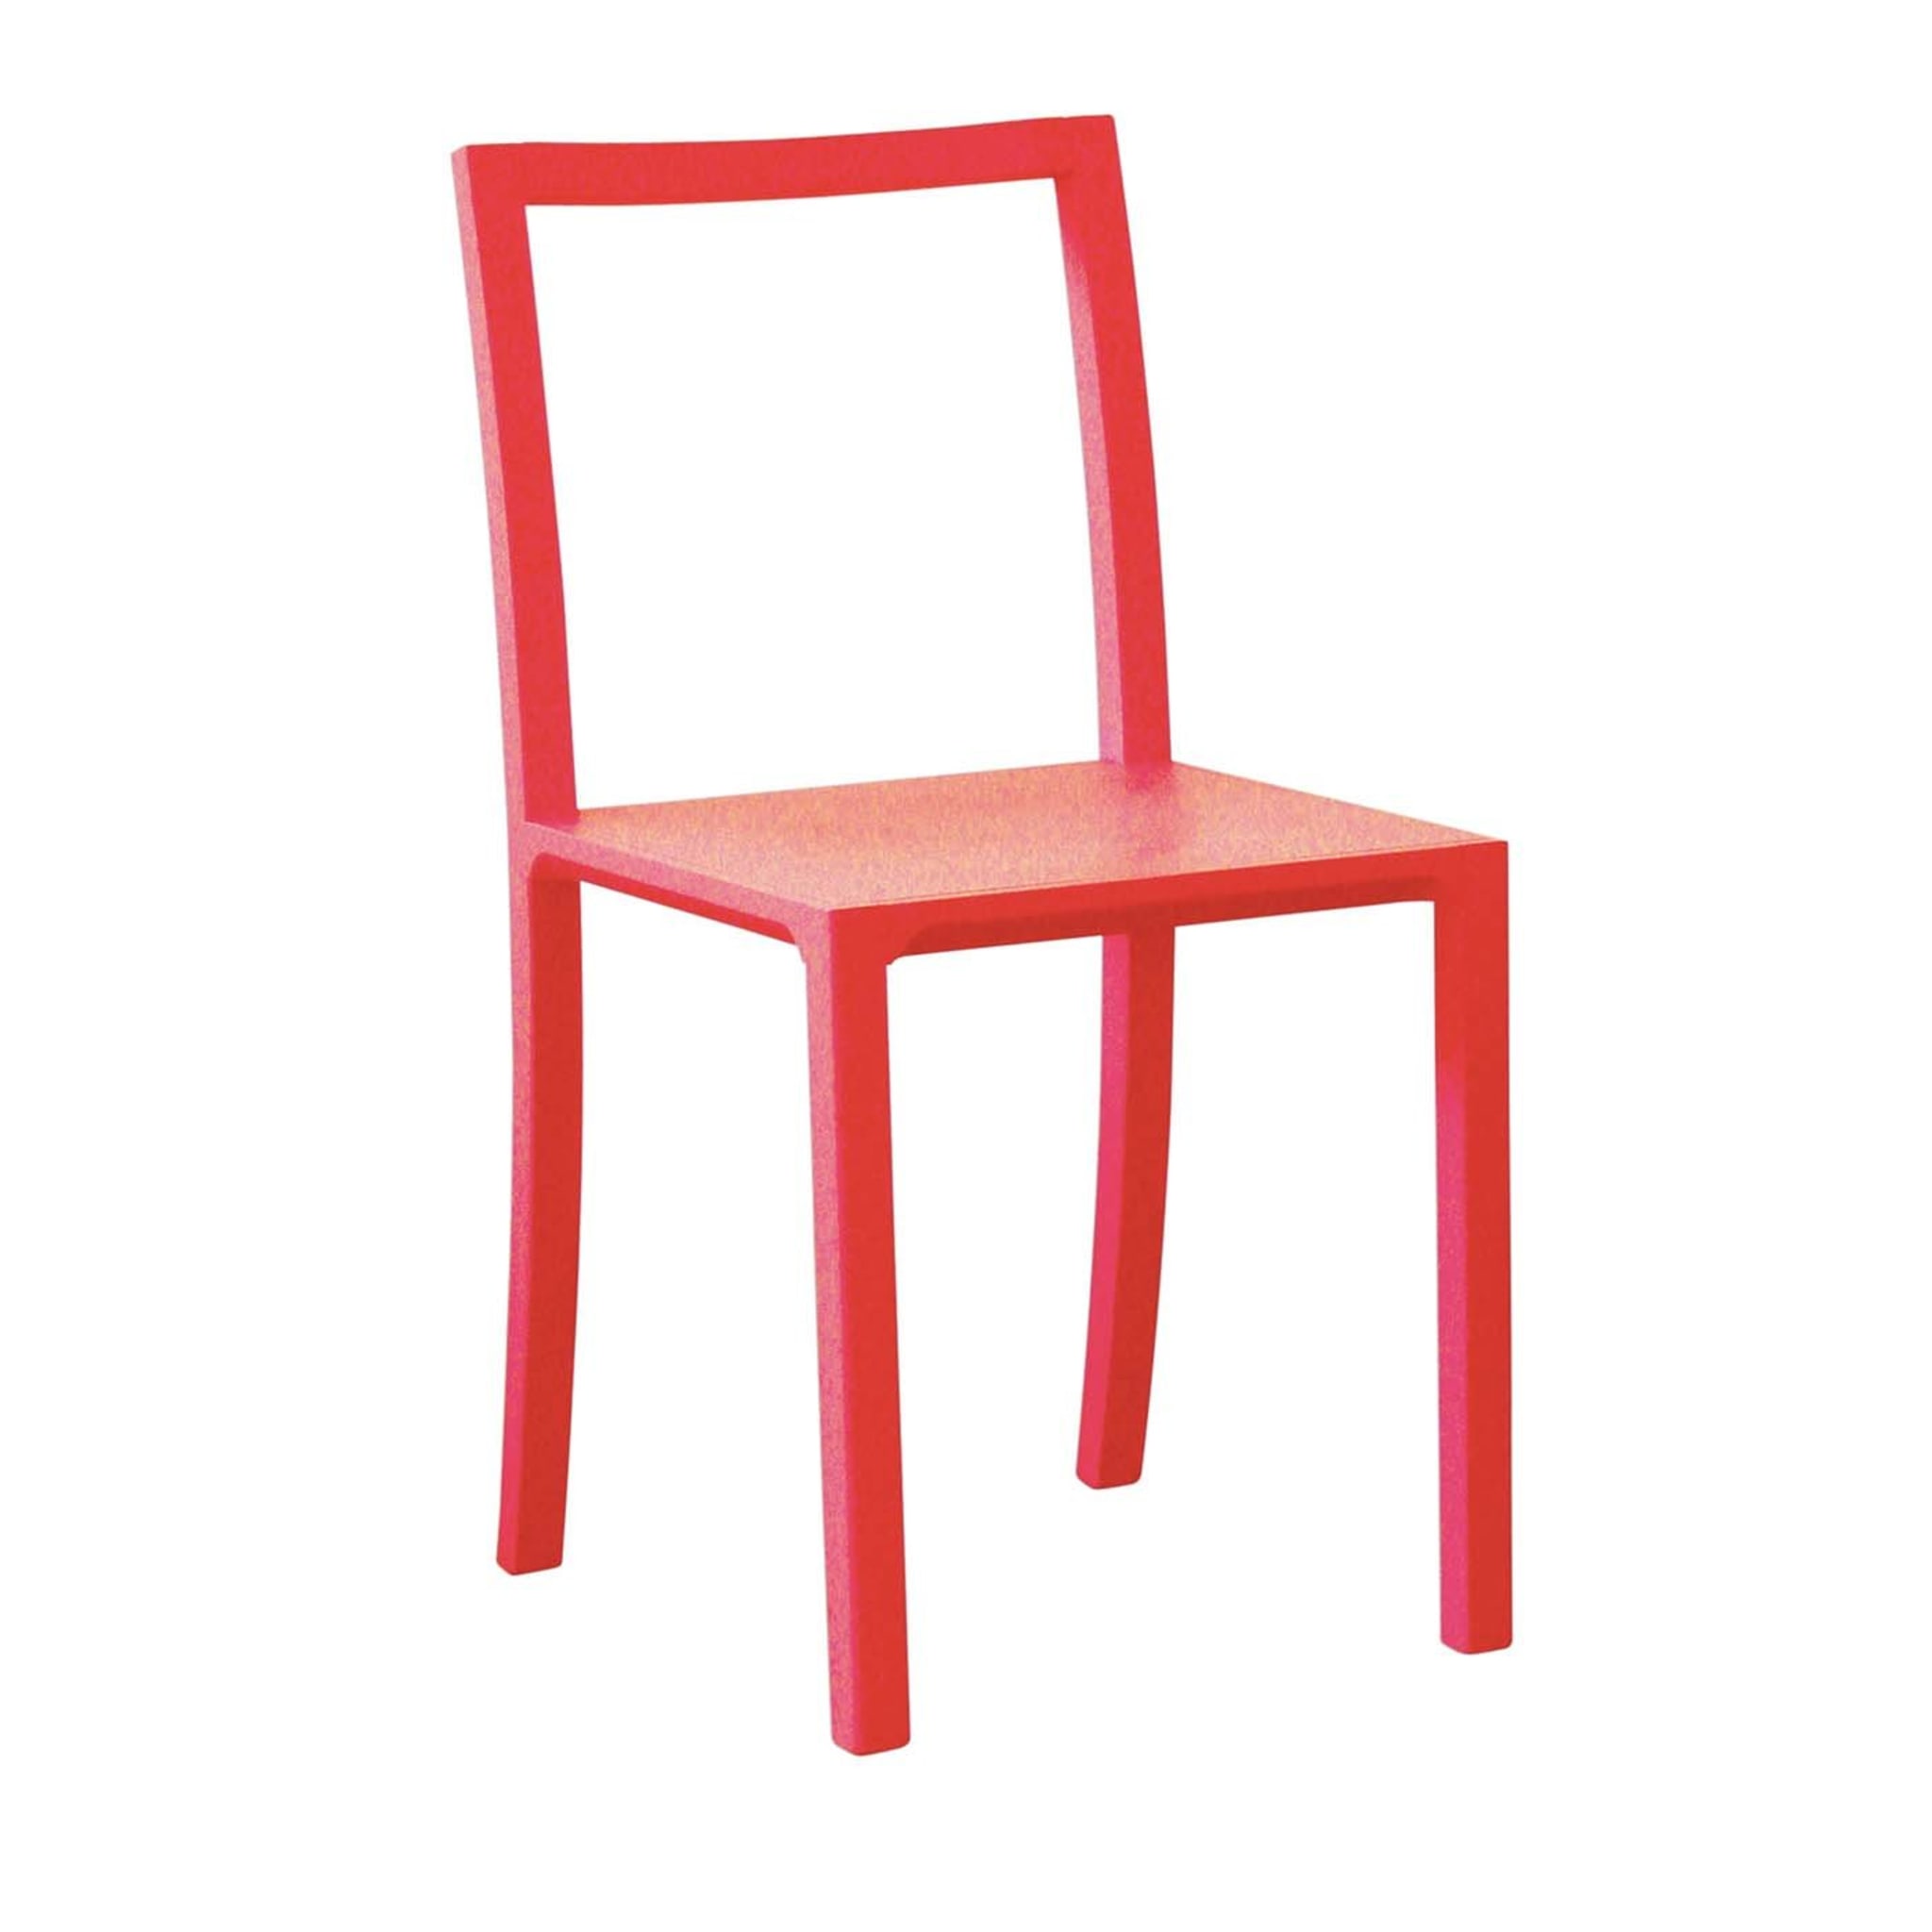 Framework Set of 2 Red Brick Chairs by Steffen Kehrle - Main view